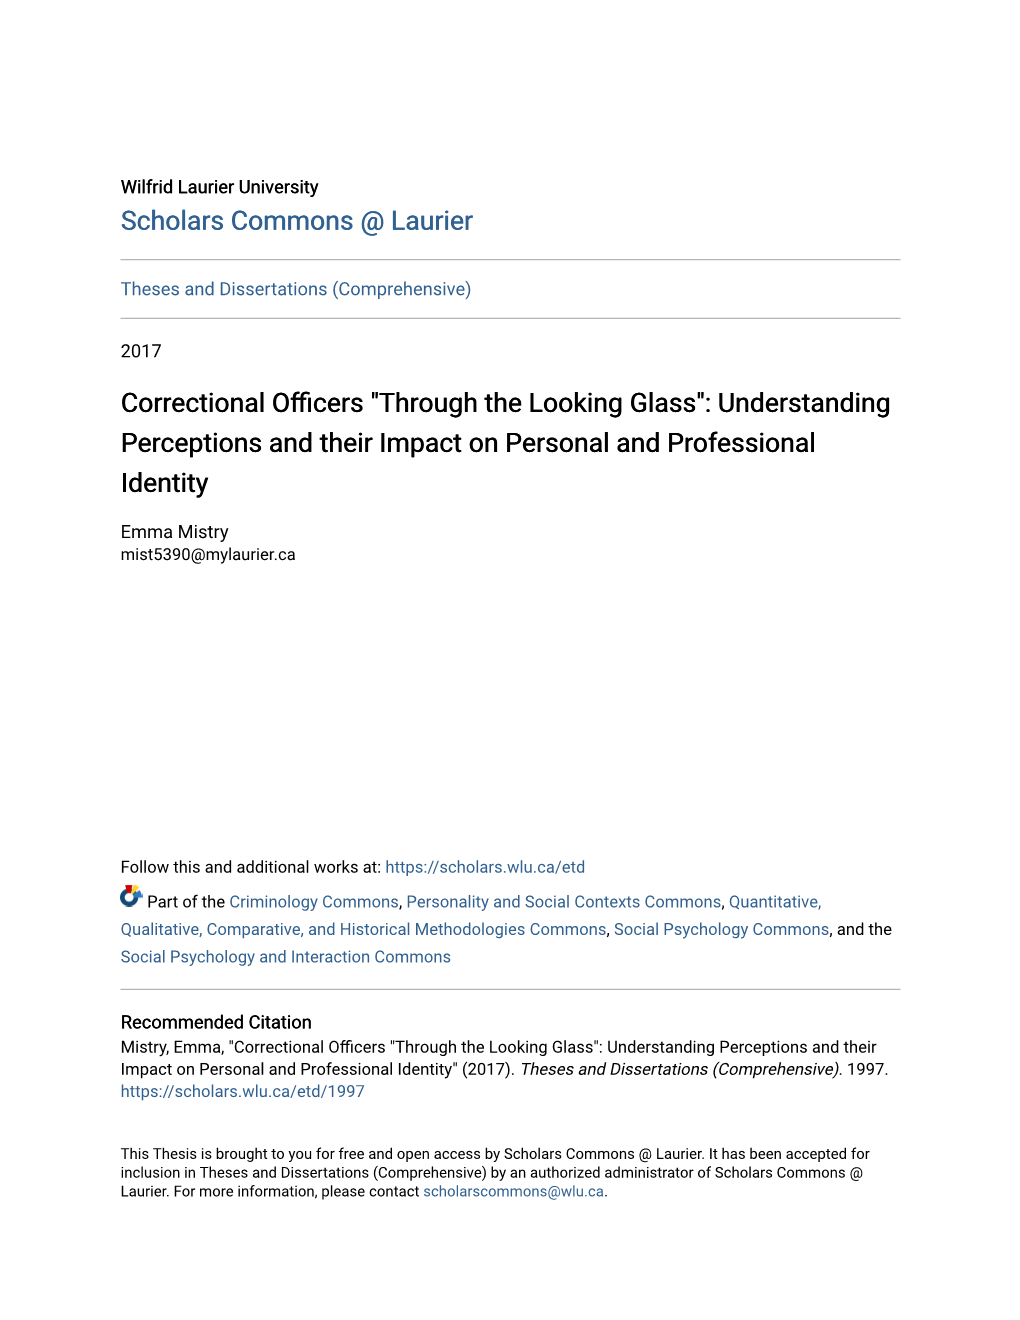 Correctional Officers "Through the Looking Glass": Understanding Perceptions and Their Impact on Personal and Professional Identity